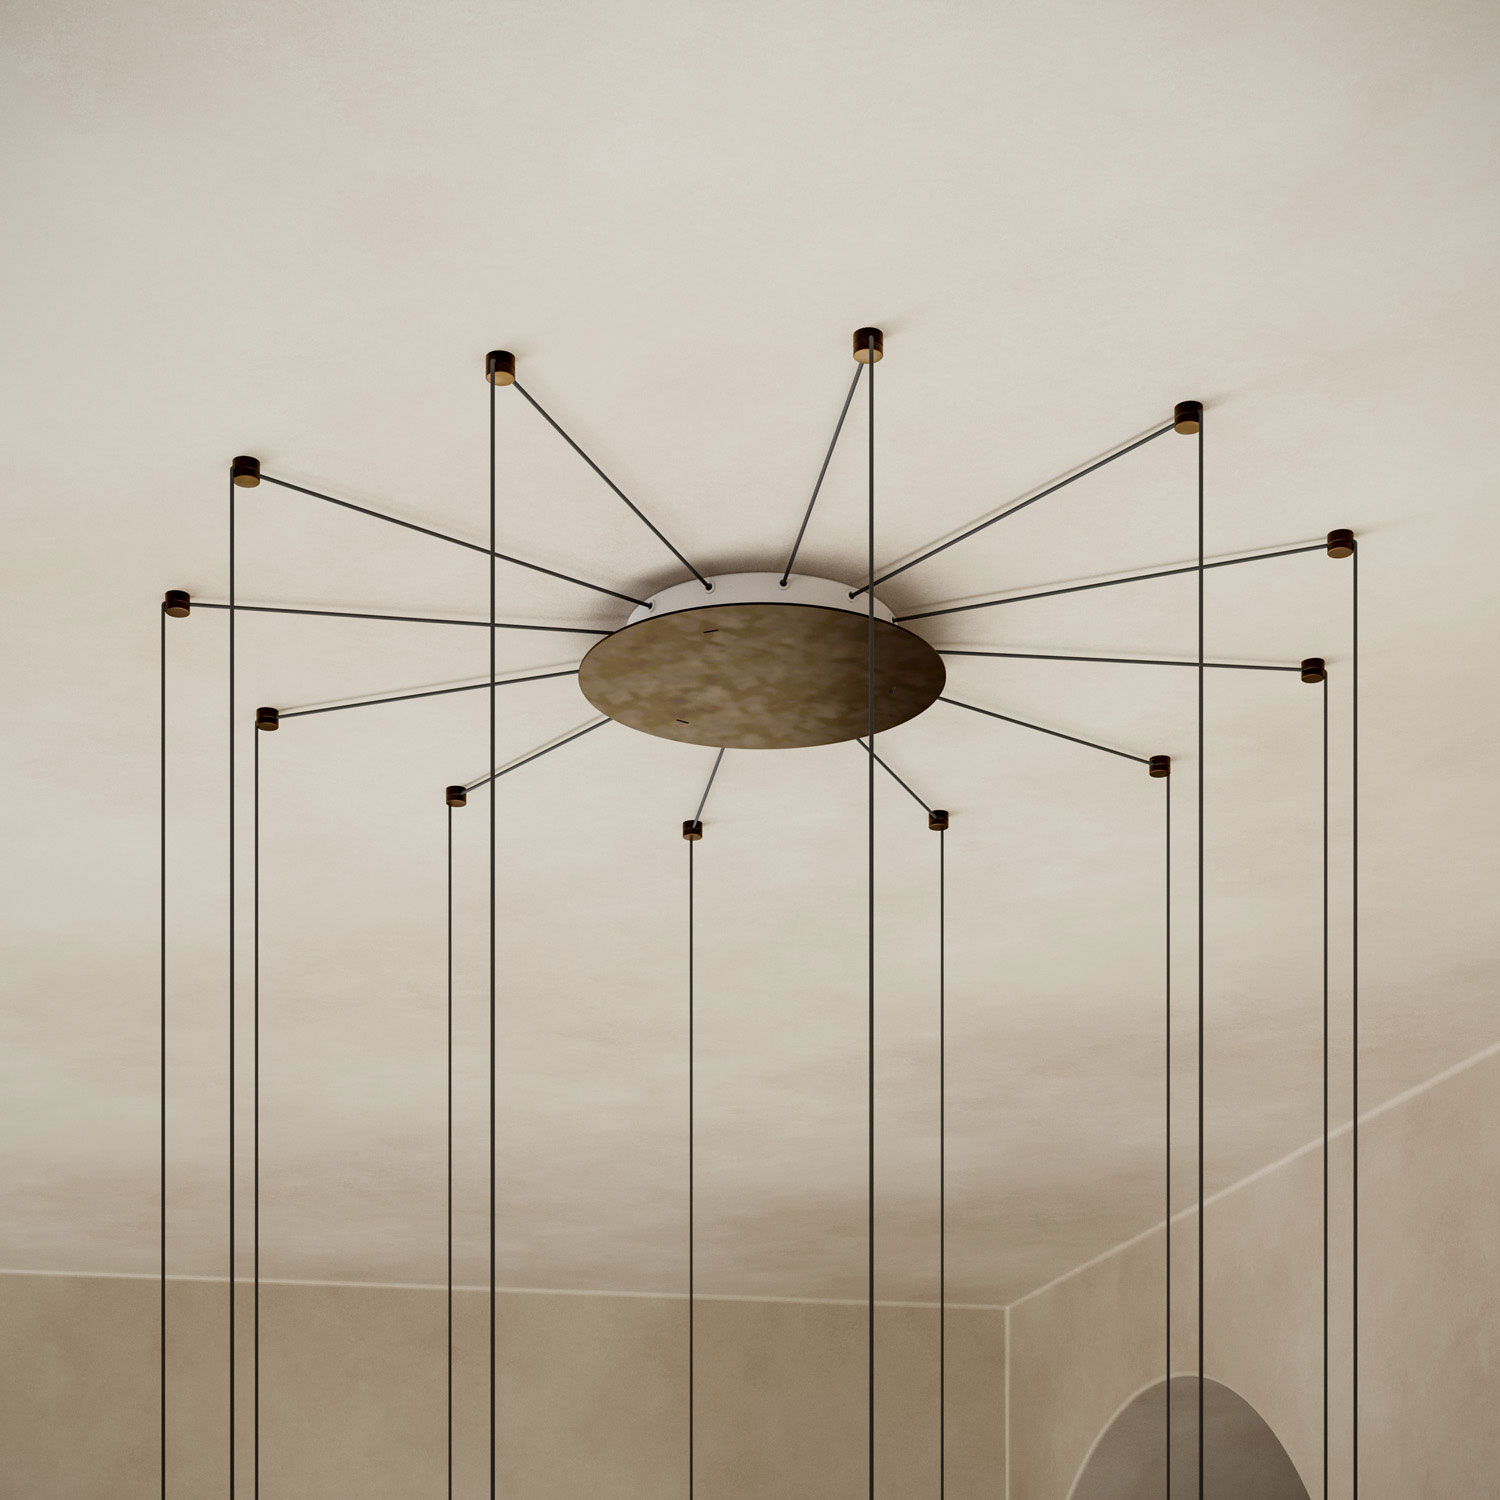 2-12 Lights radial canopy by Il Fanale